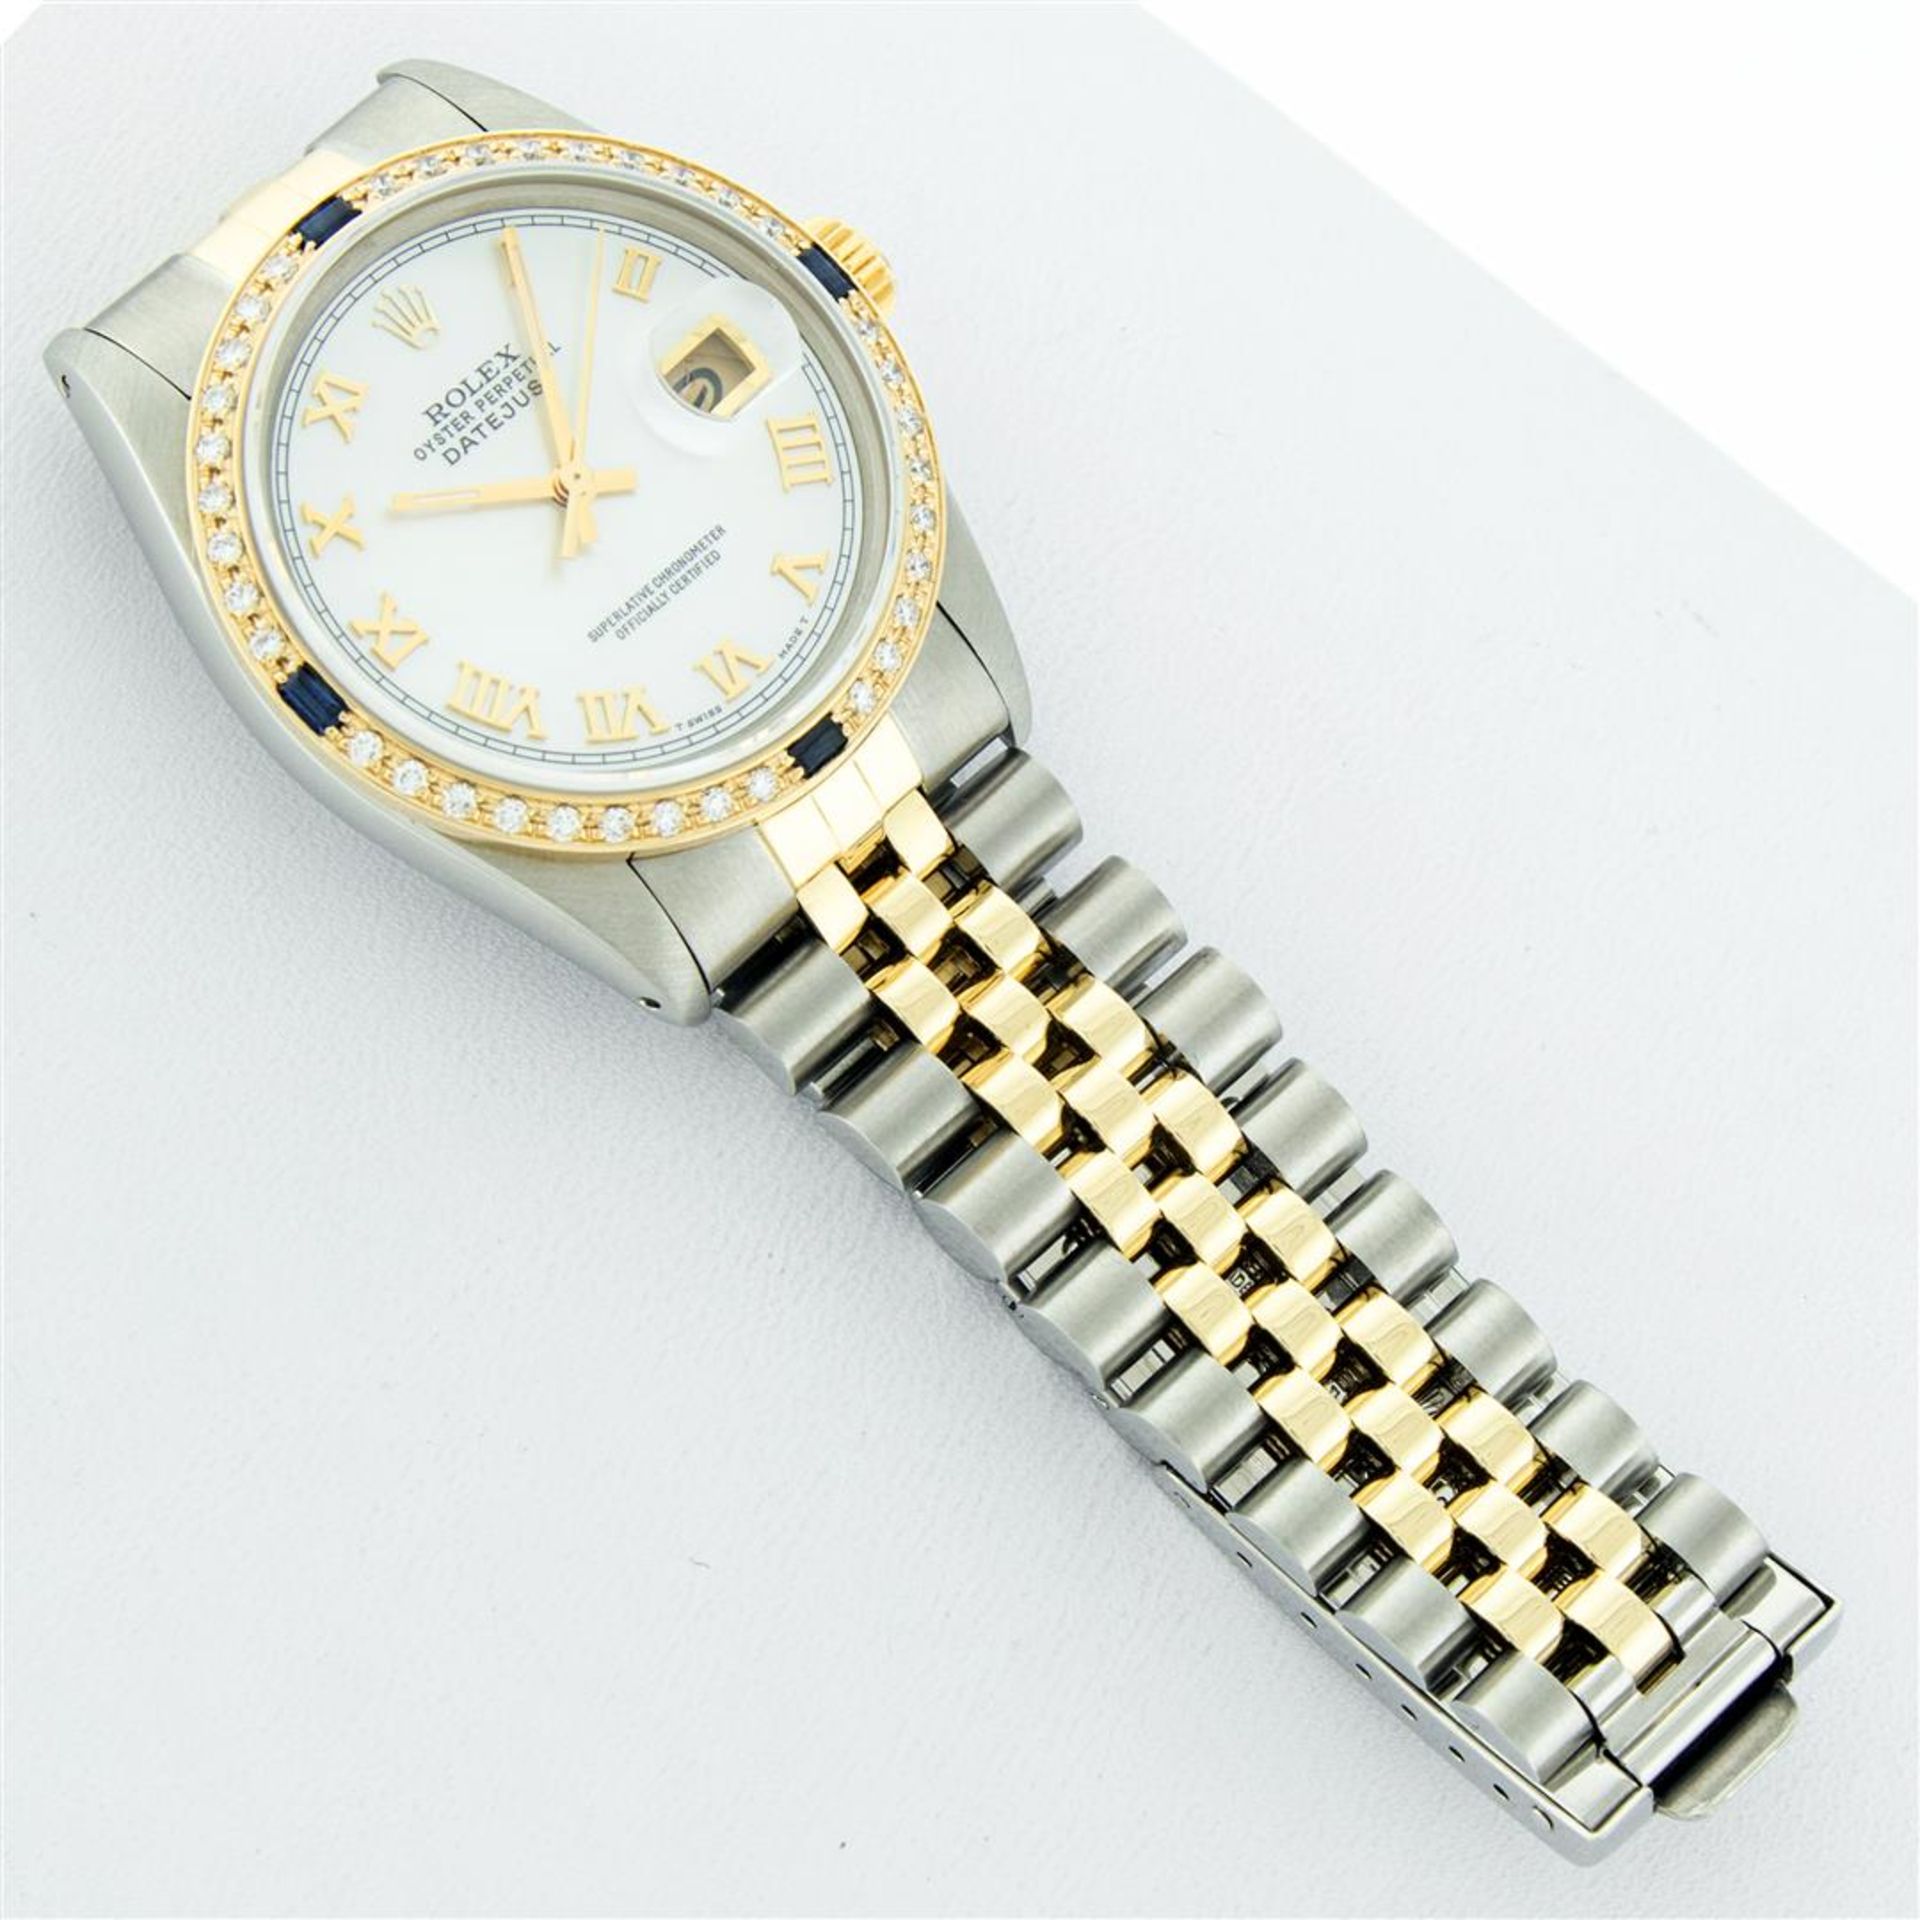 Rolex Mens 2 Tone Mother Of Pearl Diamond & Sapphire 36MM Datejust Wristwatch - Image 7 of 9